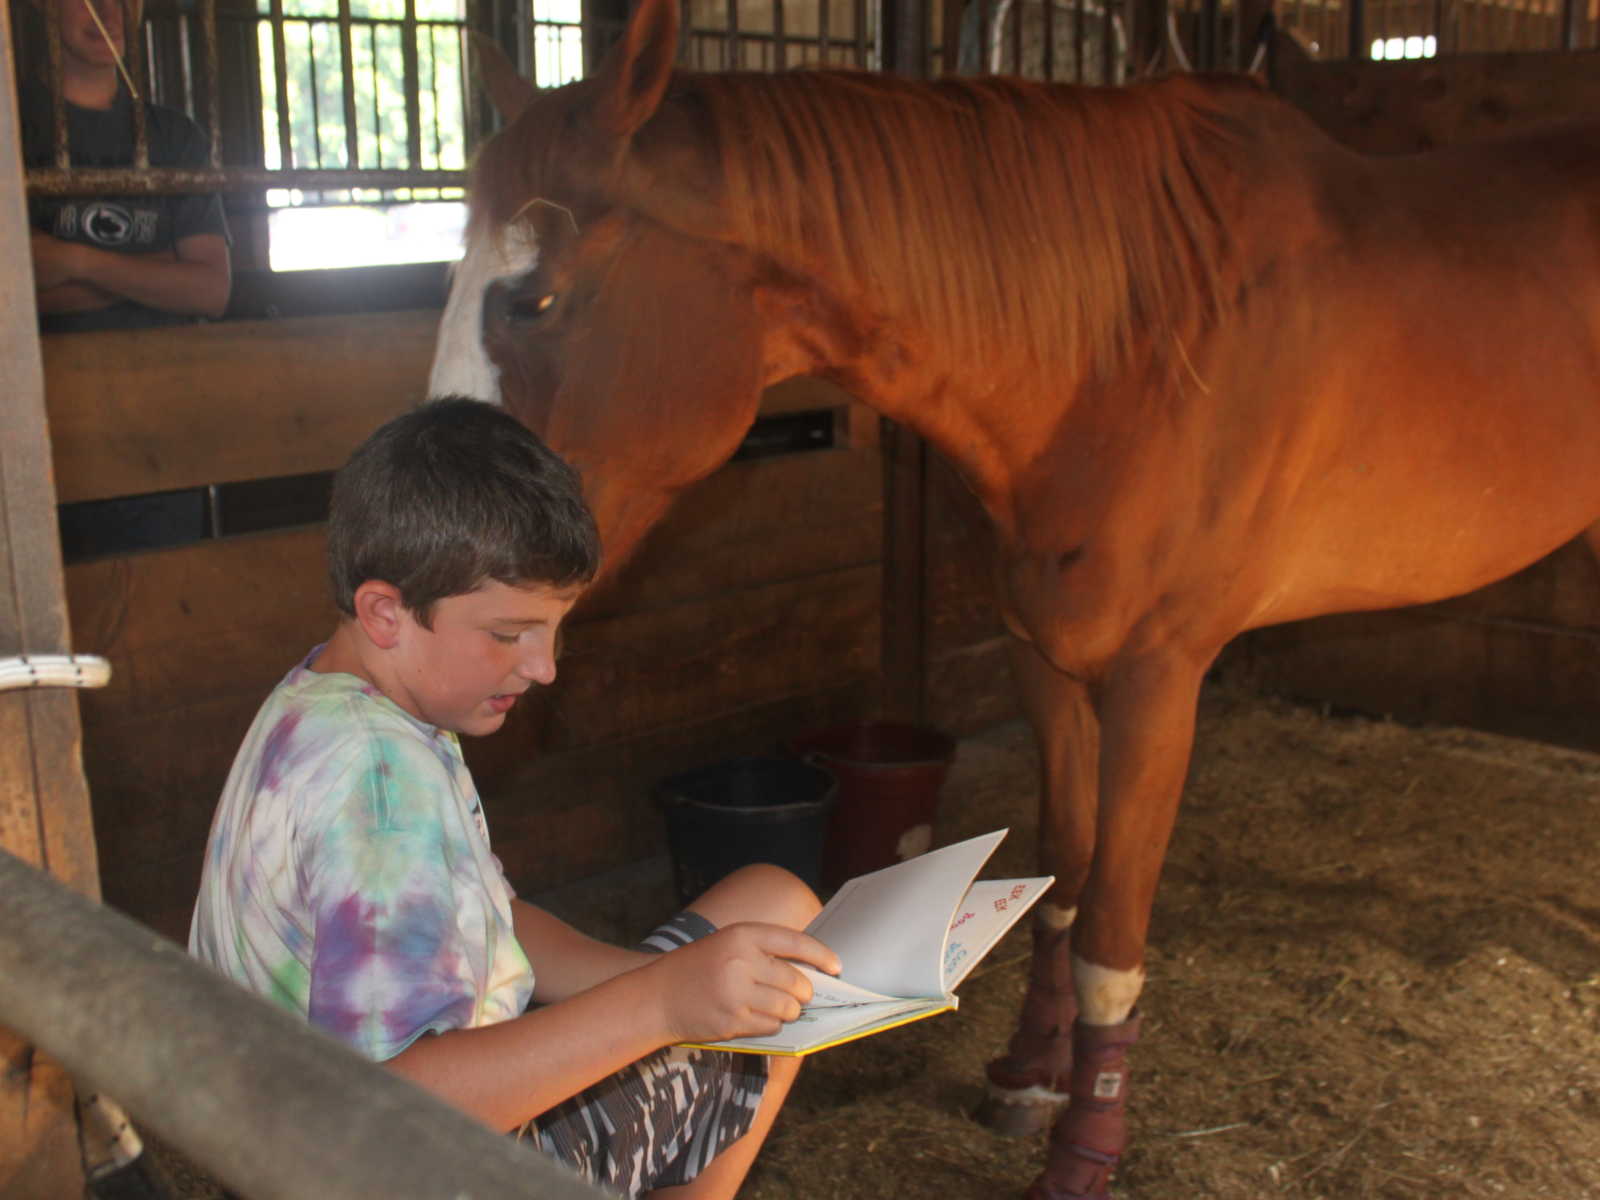 boy sits in horse stall reading a book with horse standing next to him while a girl watches outside of stall